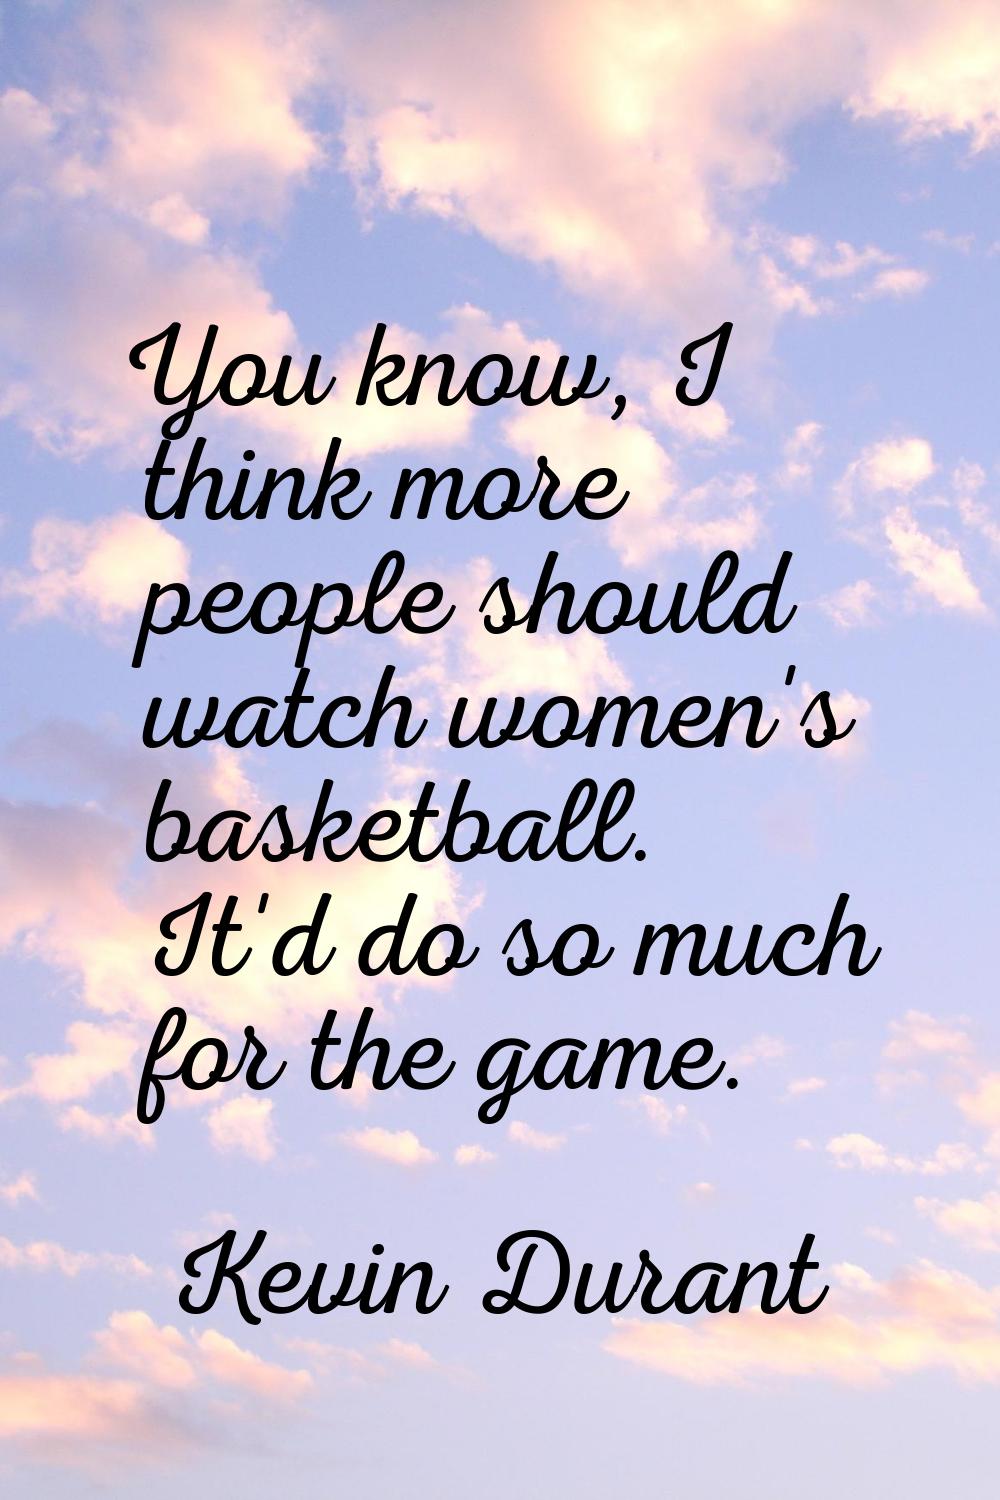 You know, I think more people should watch women's basketball. It'd do so much for the game.